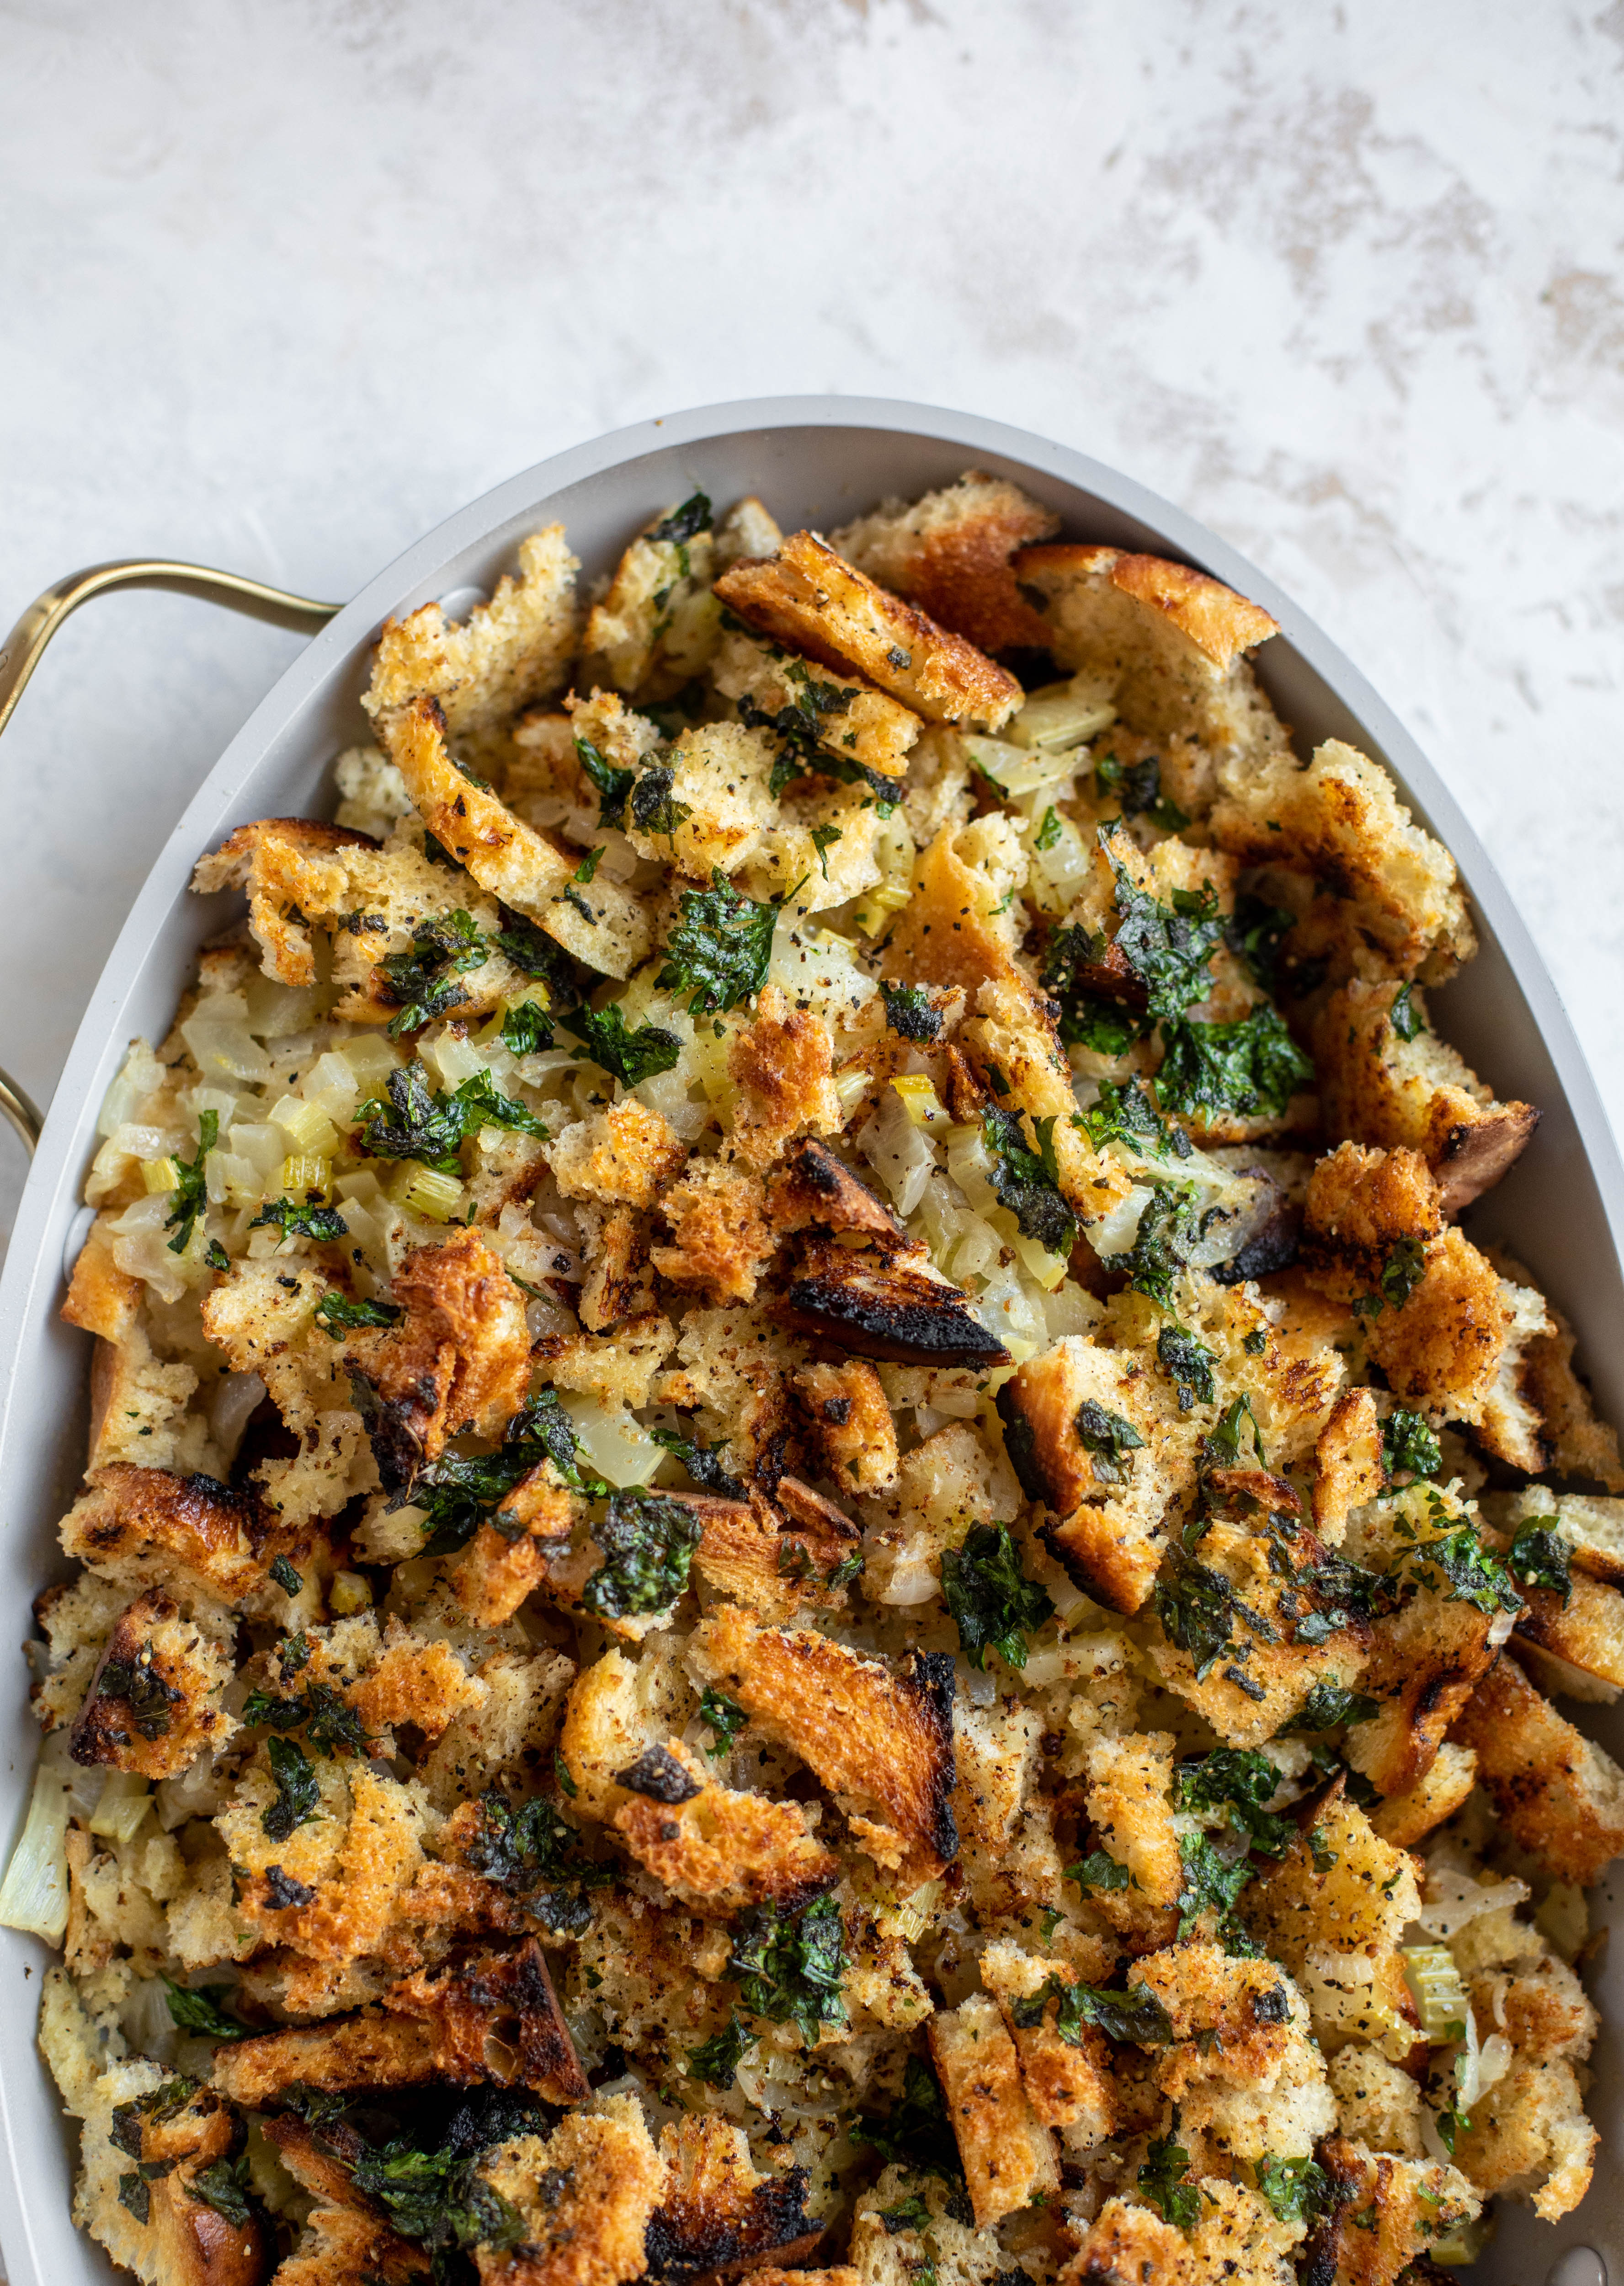 Grilled Bread Stuffing - Grilled Thanksgiving Stuffing Recipe